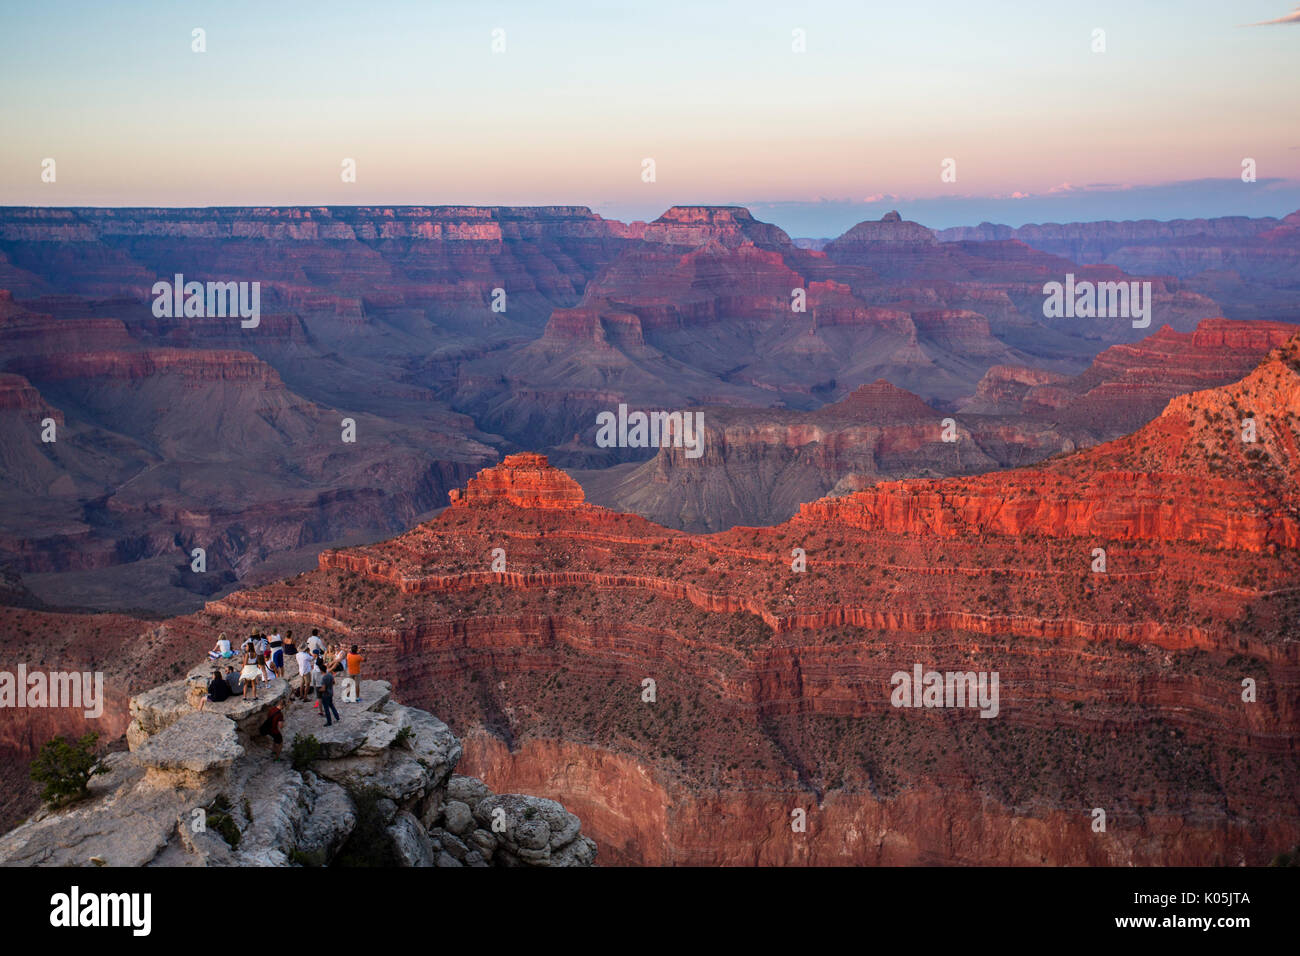 Toursits gather to take landscape photographs on the south rim of the Grand canyon in the US state of Arizona as the sun begins to set. Stock Photo